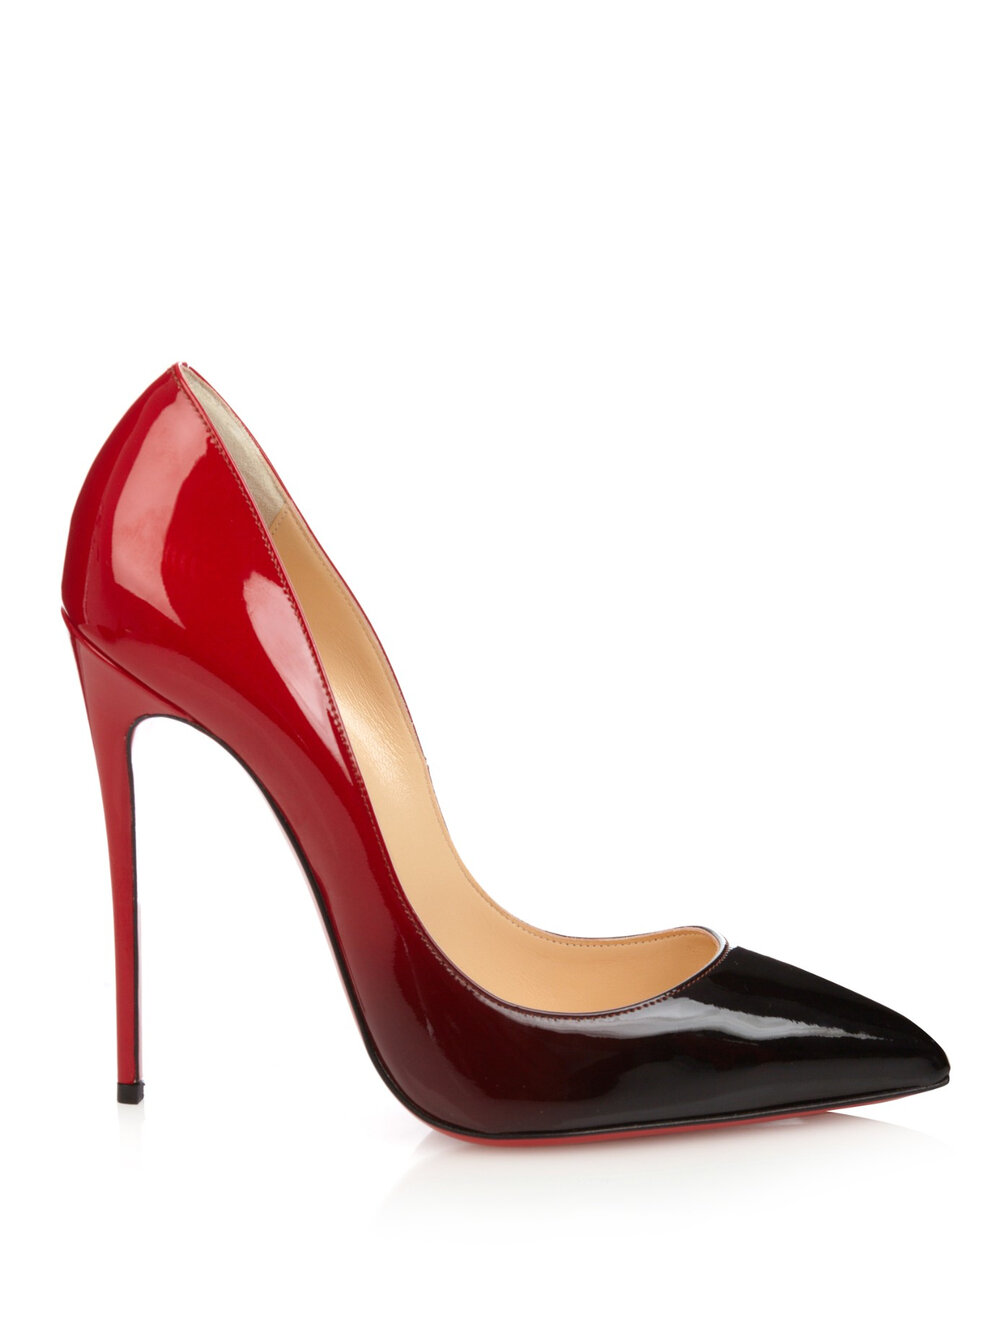 teater Stevenson Hen imod Christian Louboutin Pigalle Follies 120mm Pumps in Black and Red Ombré —  UFO No More